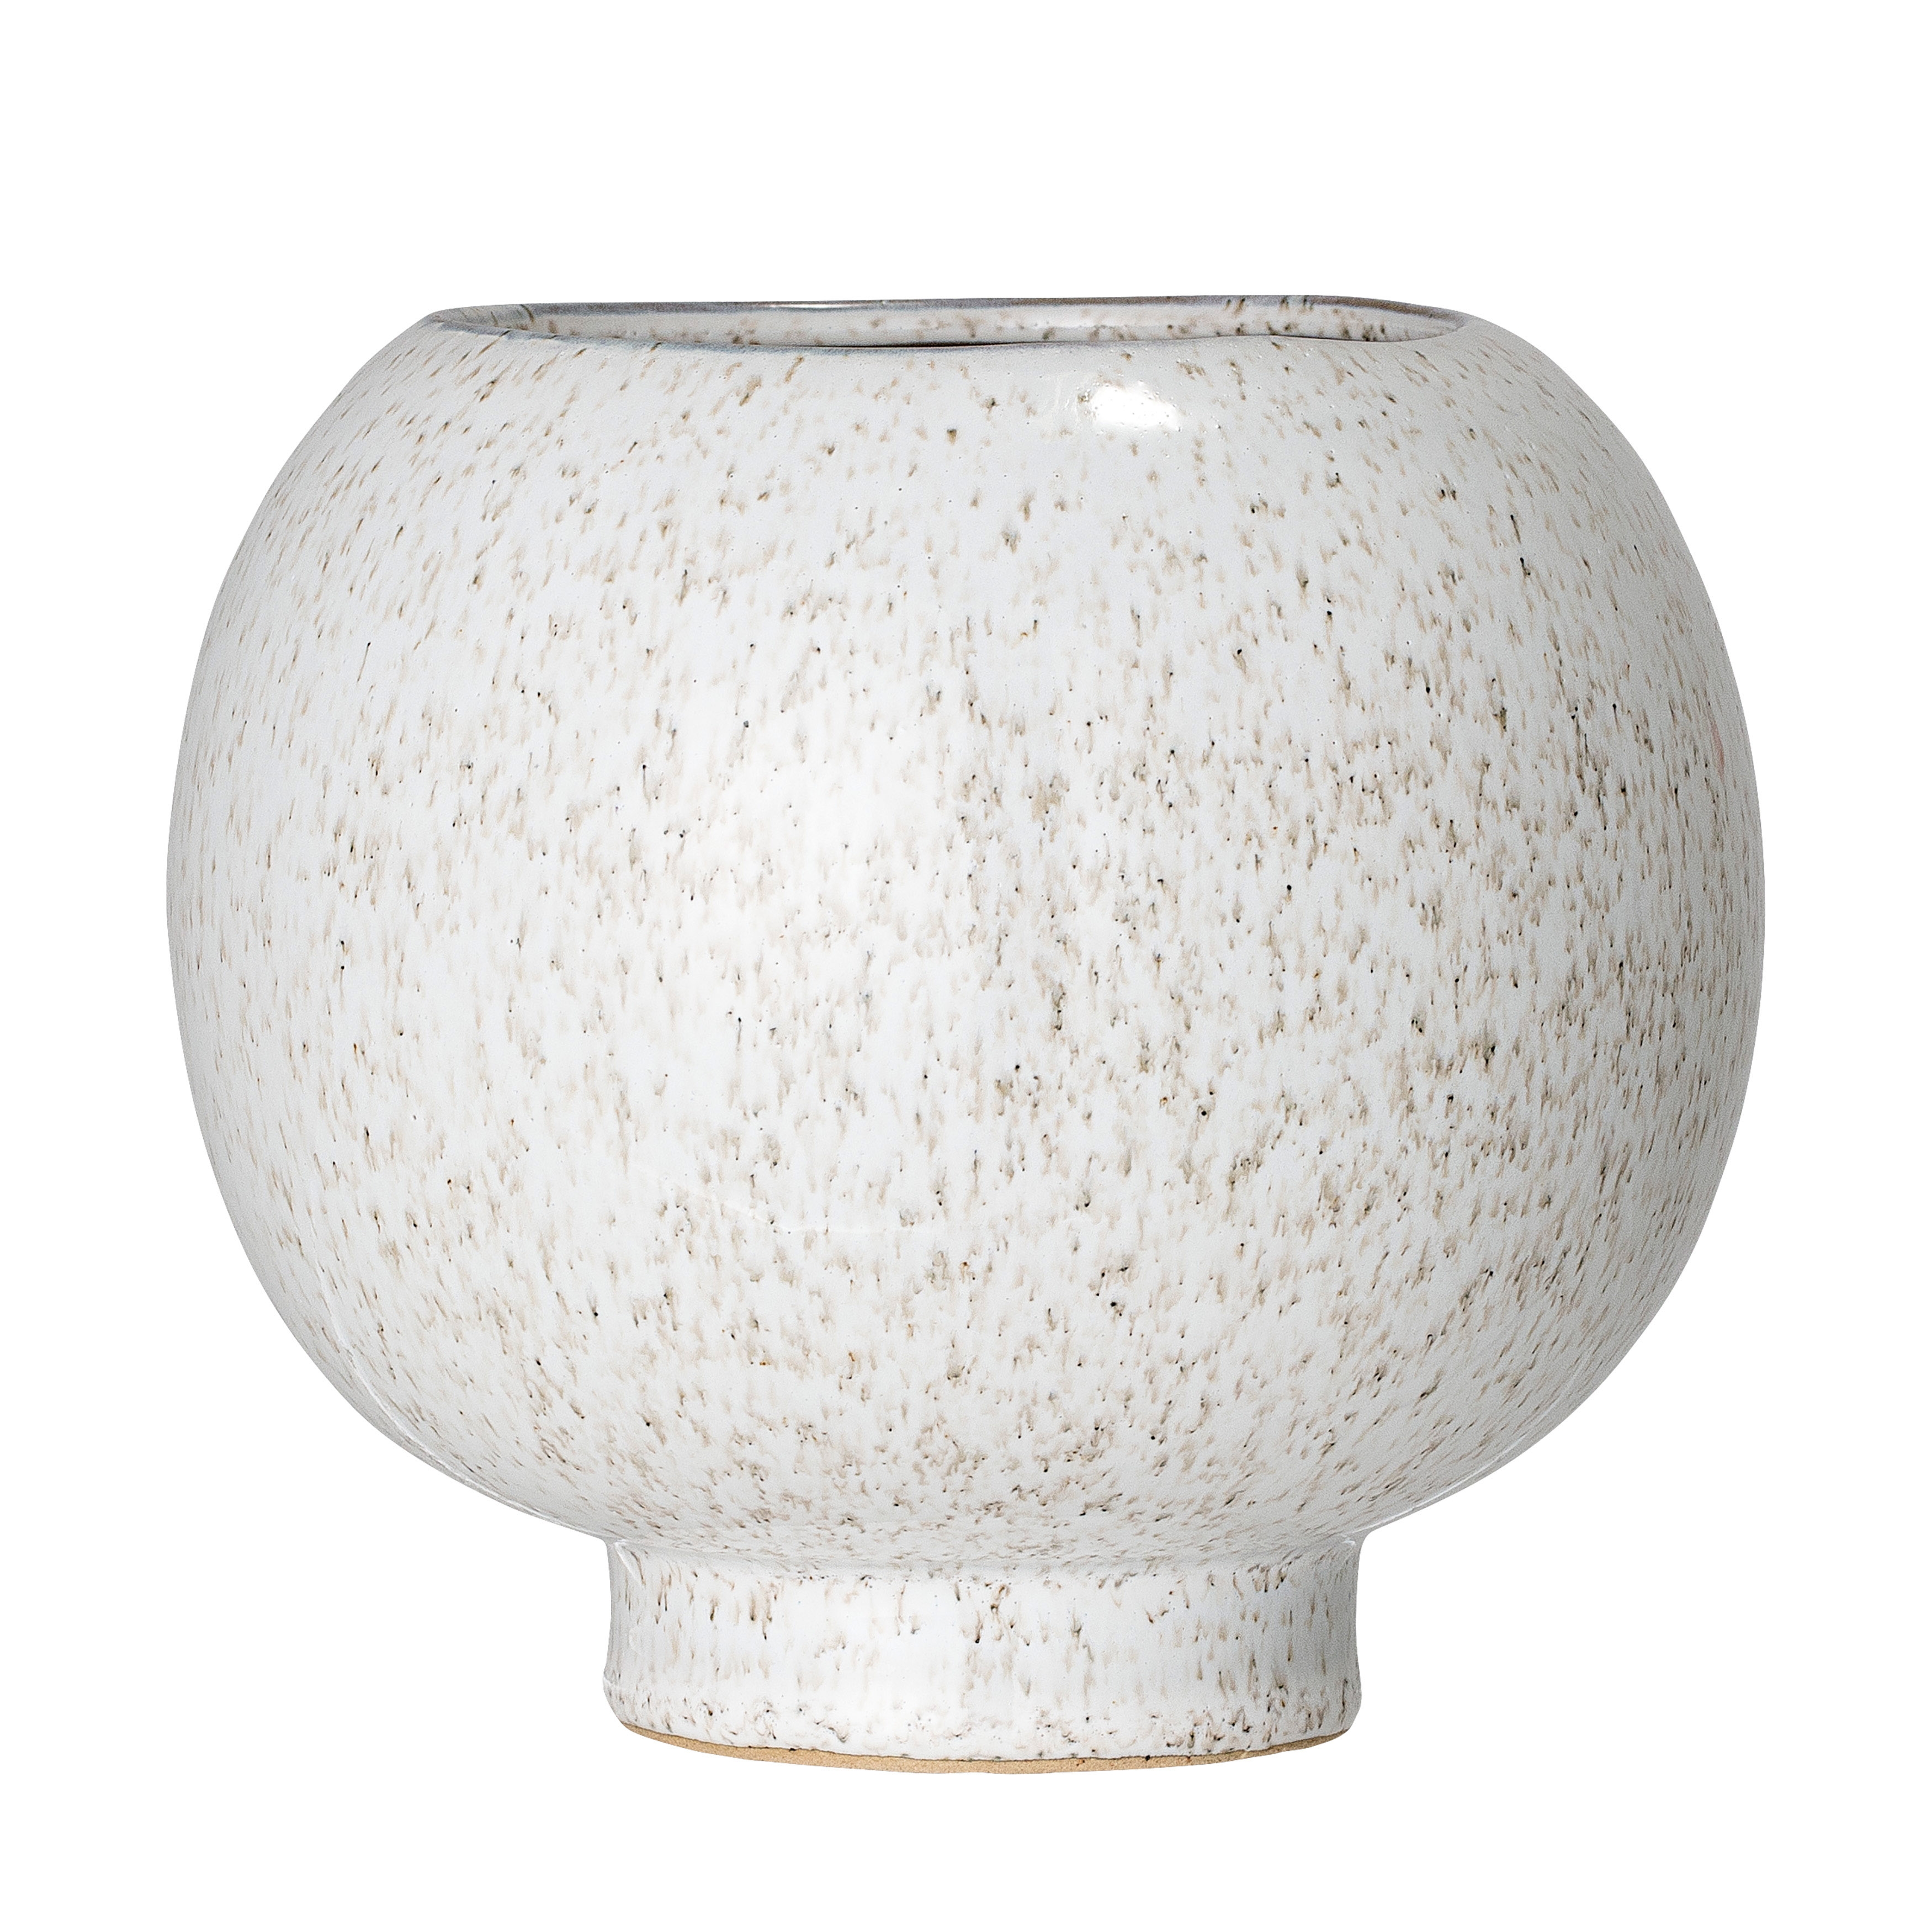 Ball Shaped White Speckled Stoneware Flower Pot - Image 0